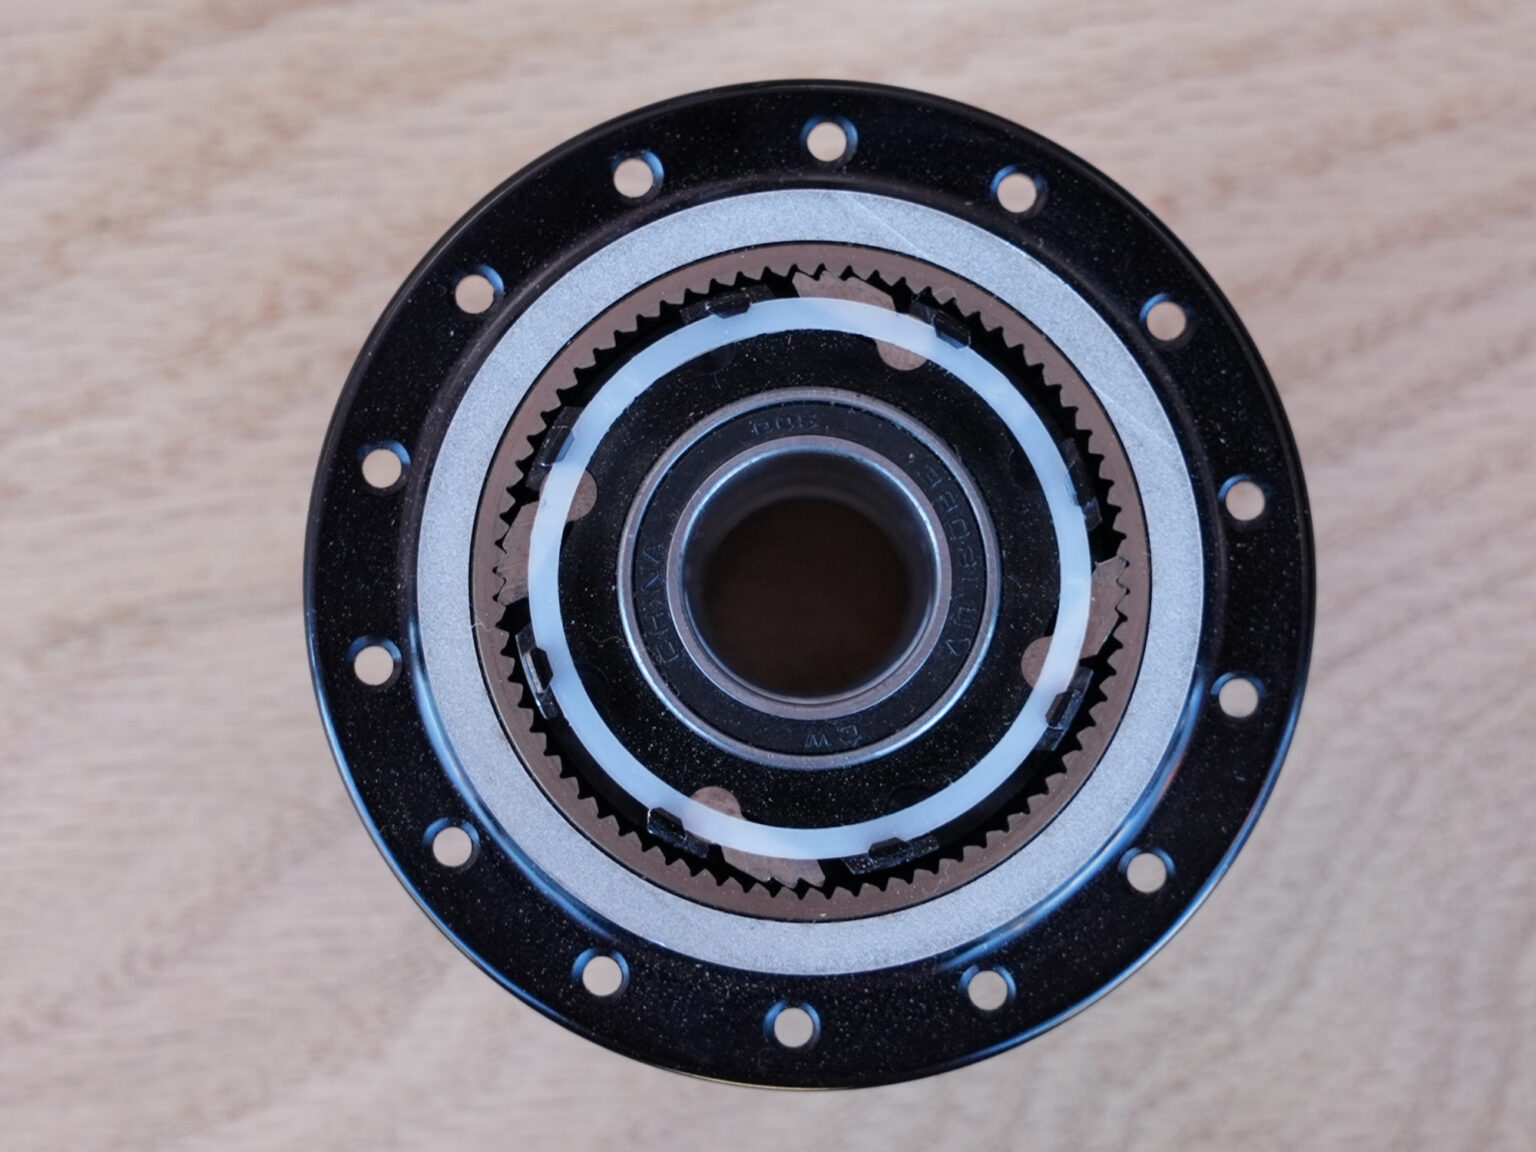 internal ratchet ring and pawl details on prototype gravel hubs from project 321